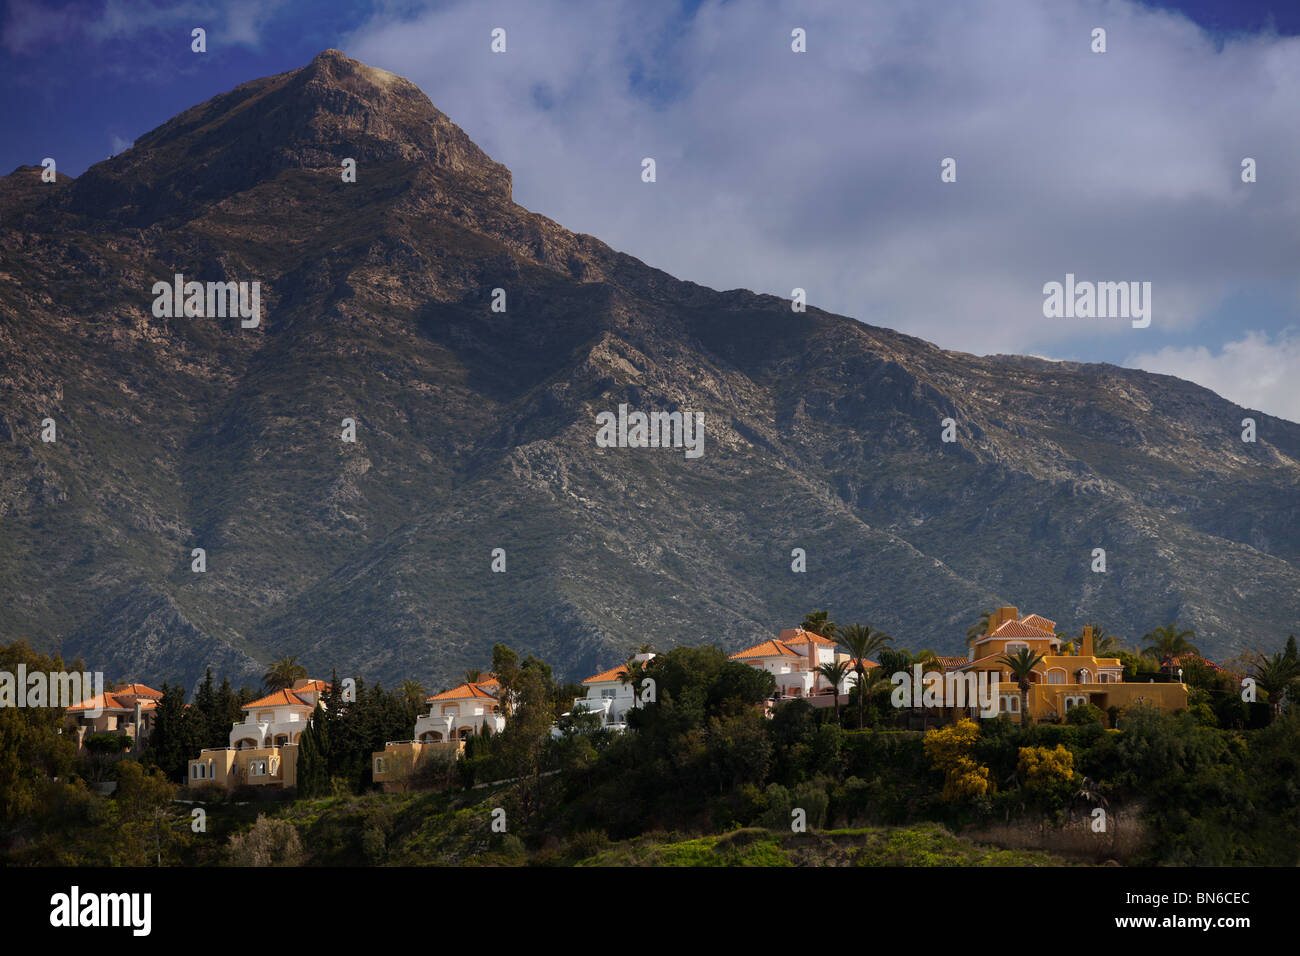 Luxury holiday homes in the Andalusian mountains Stock Photo